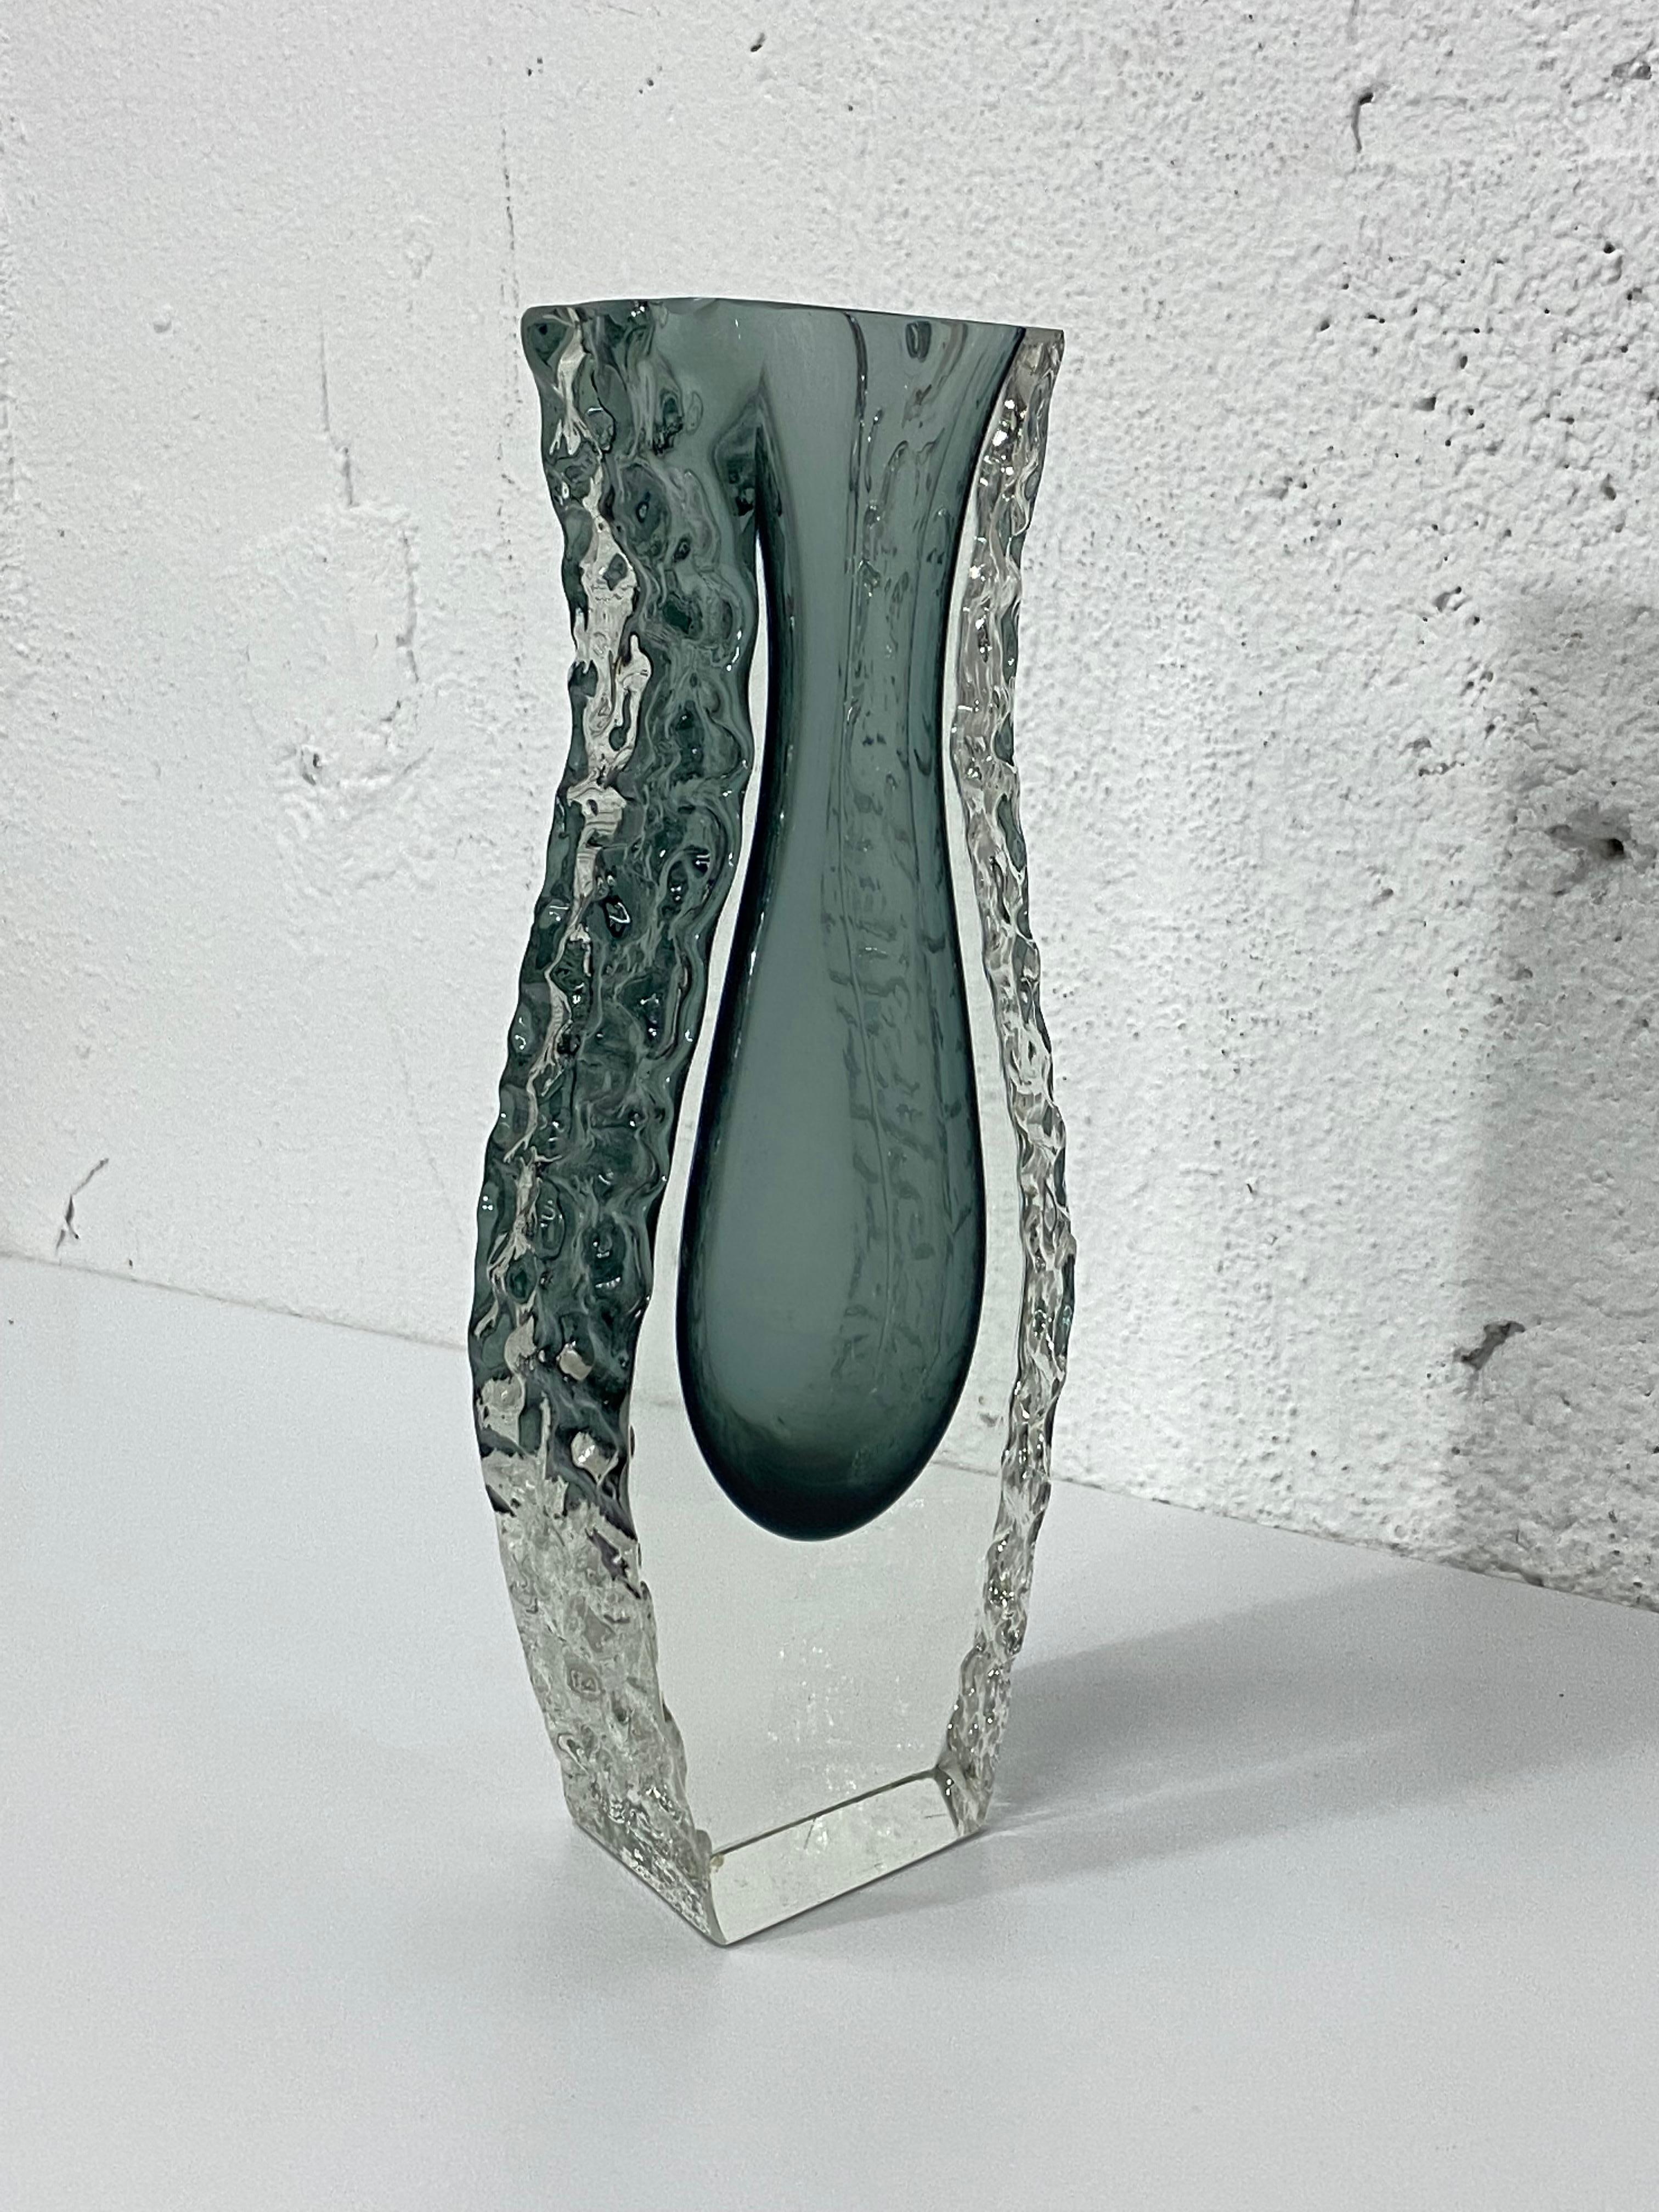 Alessandro Mandruzzato Faceted and Textured Murano Sommerso Glass Vase 2